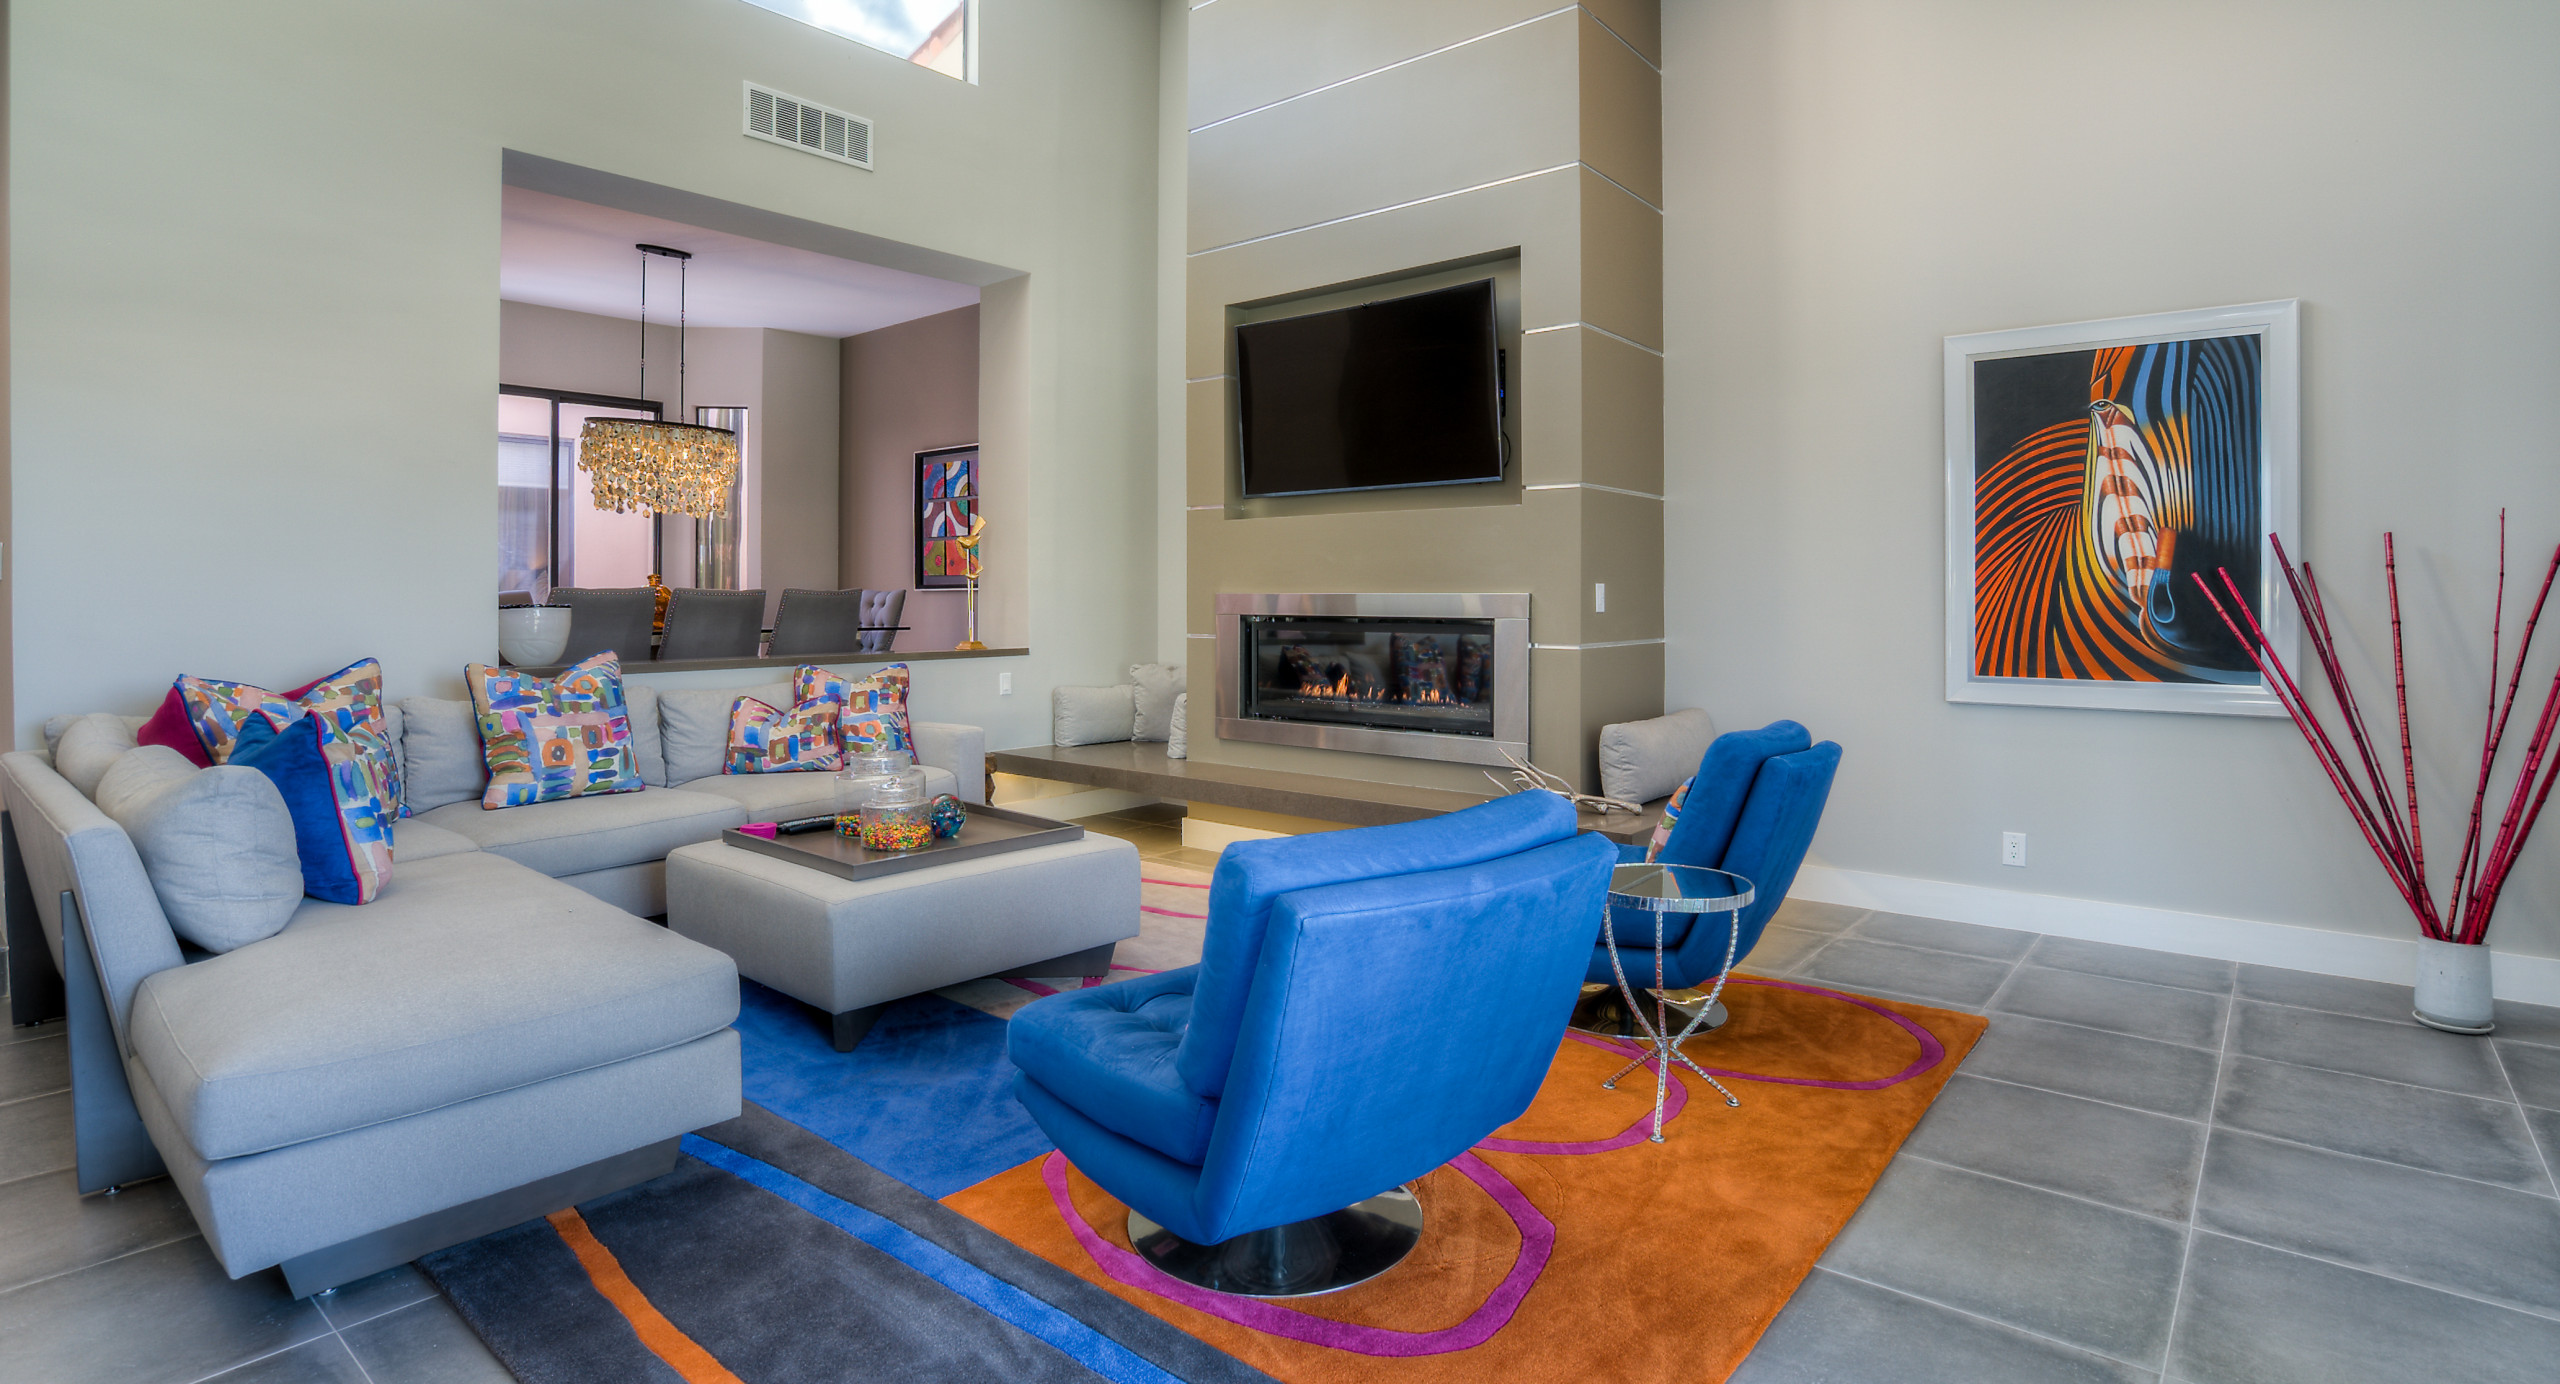 Living room has swivel chairs that can be used to enjoy the view of the golf course, or swivel back to be included in the room setting.  The use of strong colors add a sense of excitement and whimsy t